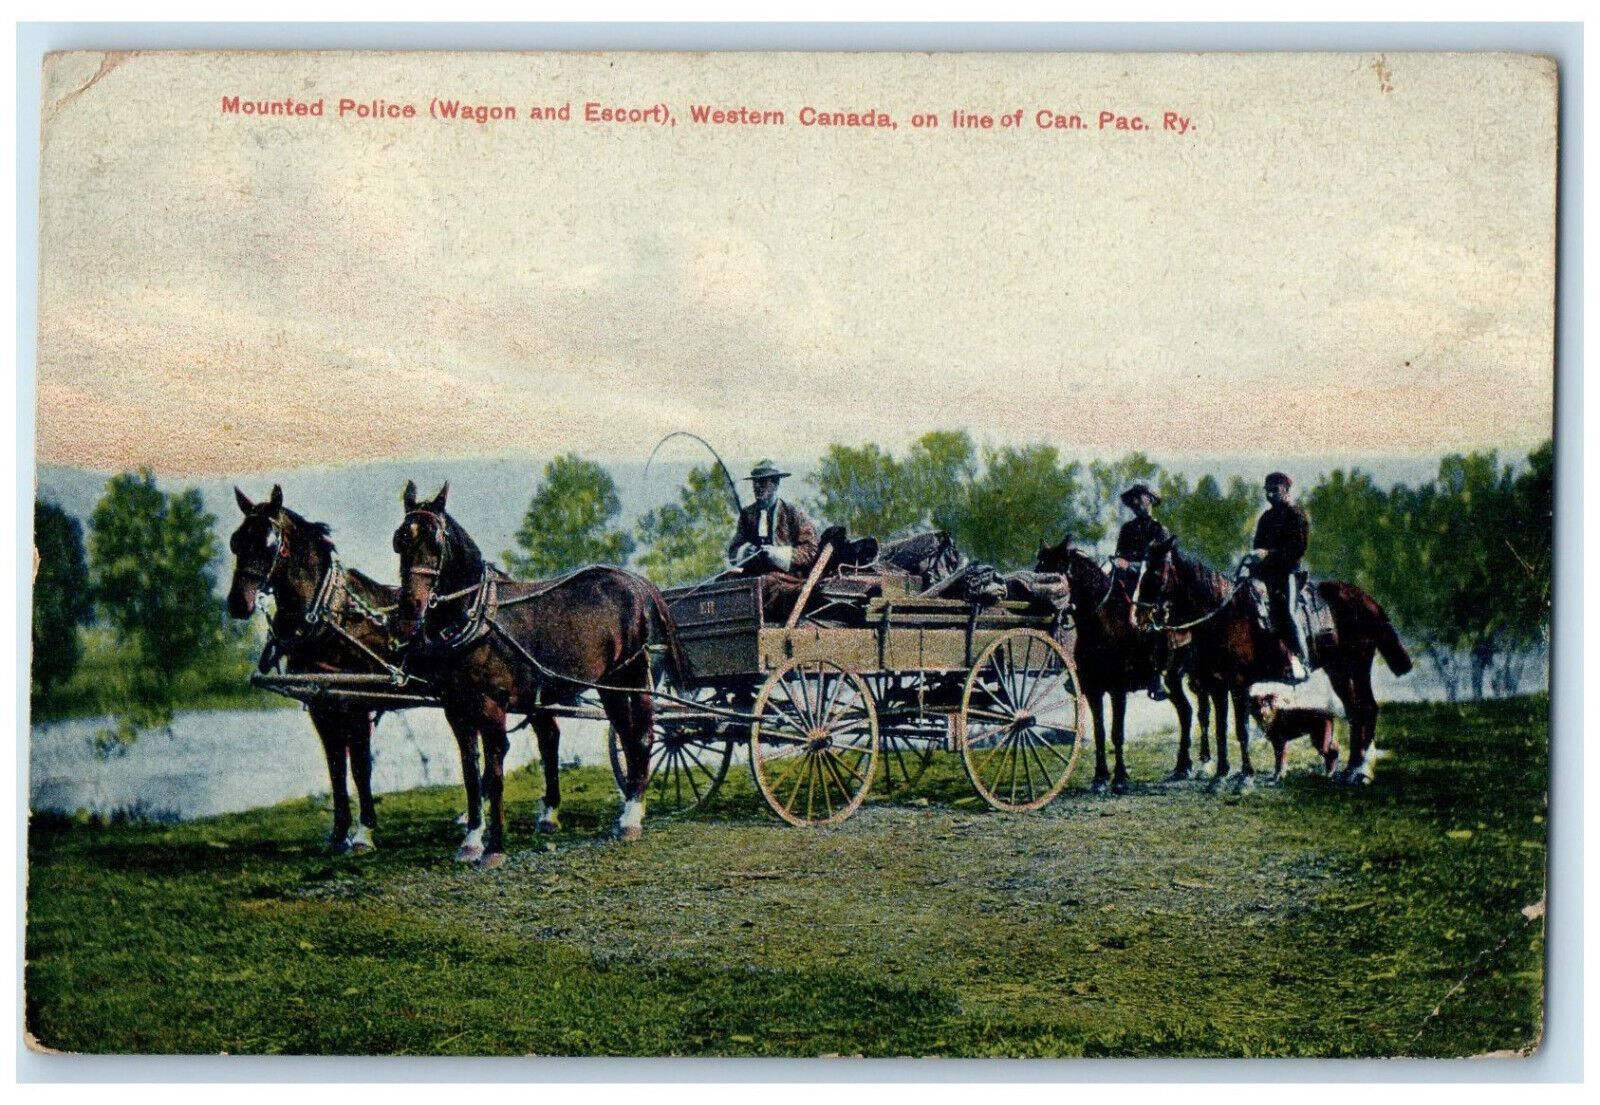 1907 Mounted Police Wagon and Escort Western Canada Antique Postcard